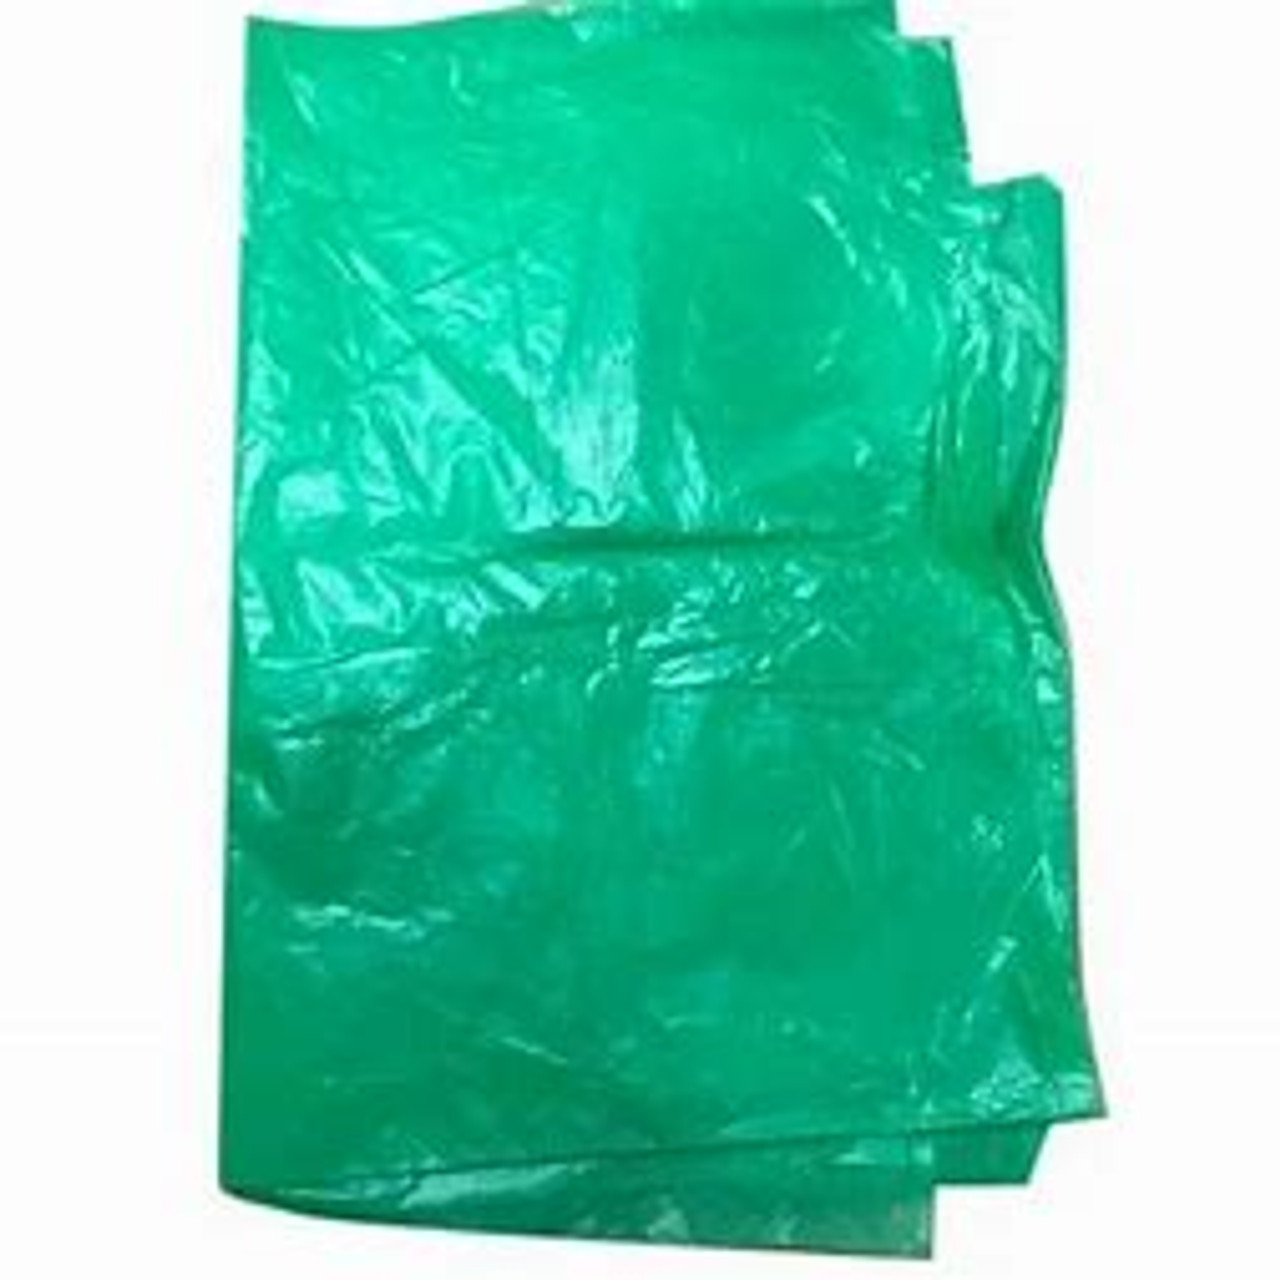  Polythene Pallet Toppers / Sheets  